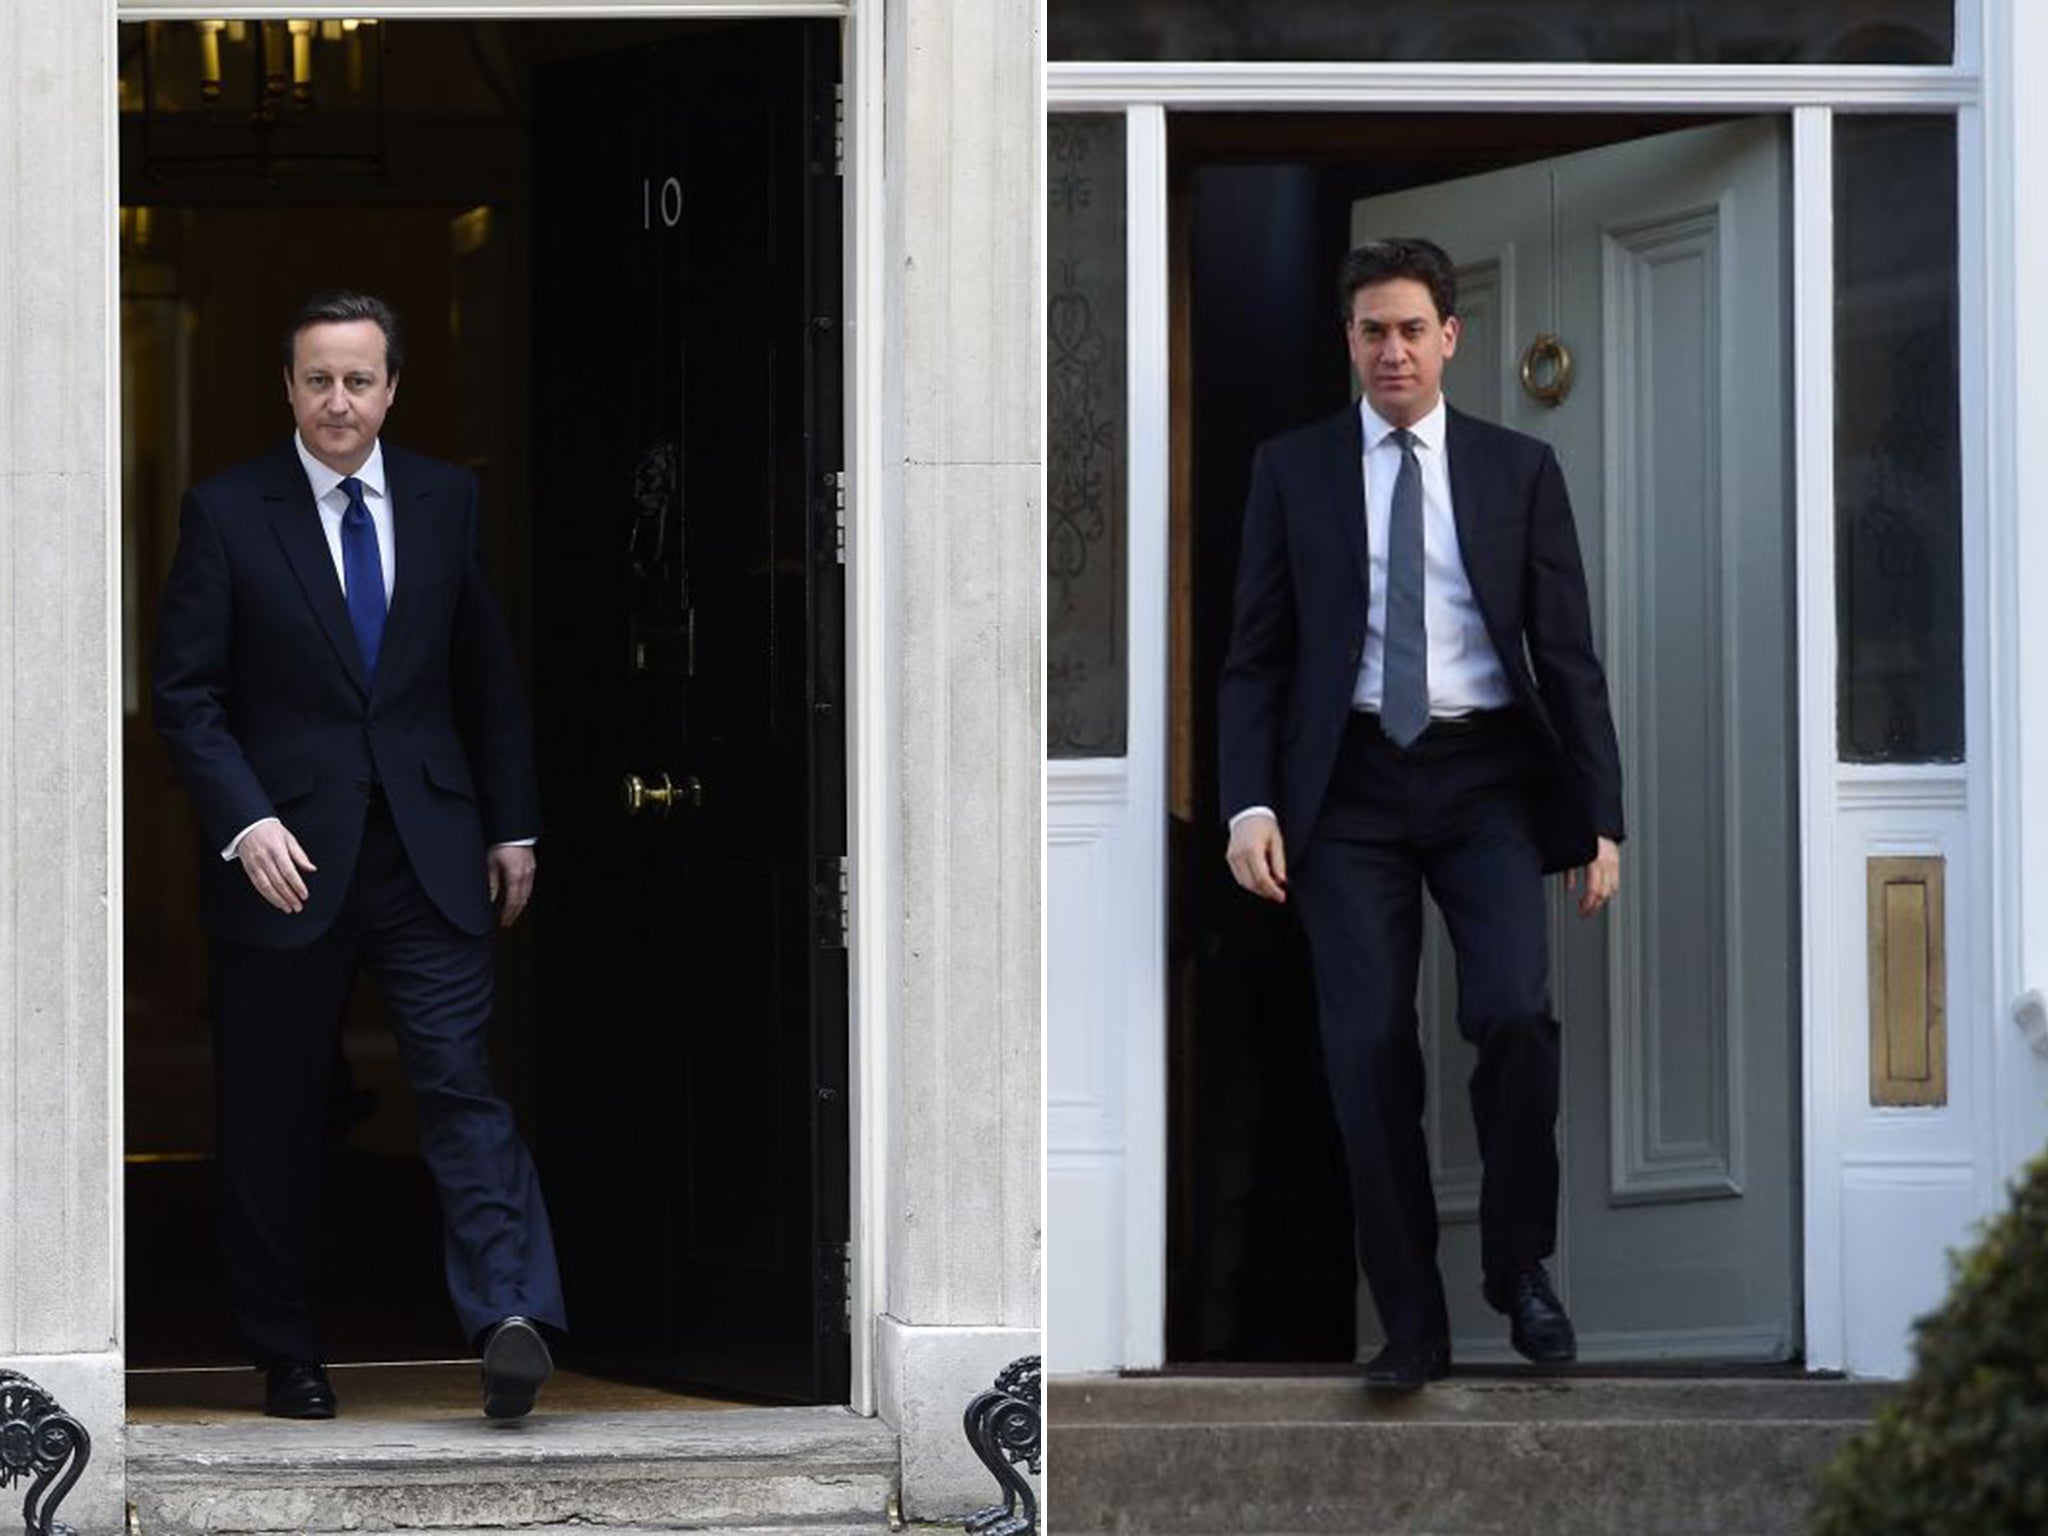 David Cameron and Ed Miliband officially launched their election campaigns yesterday after Parliament was dissolved